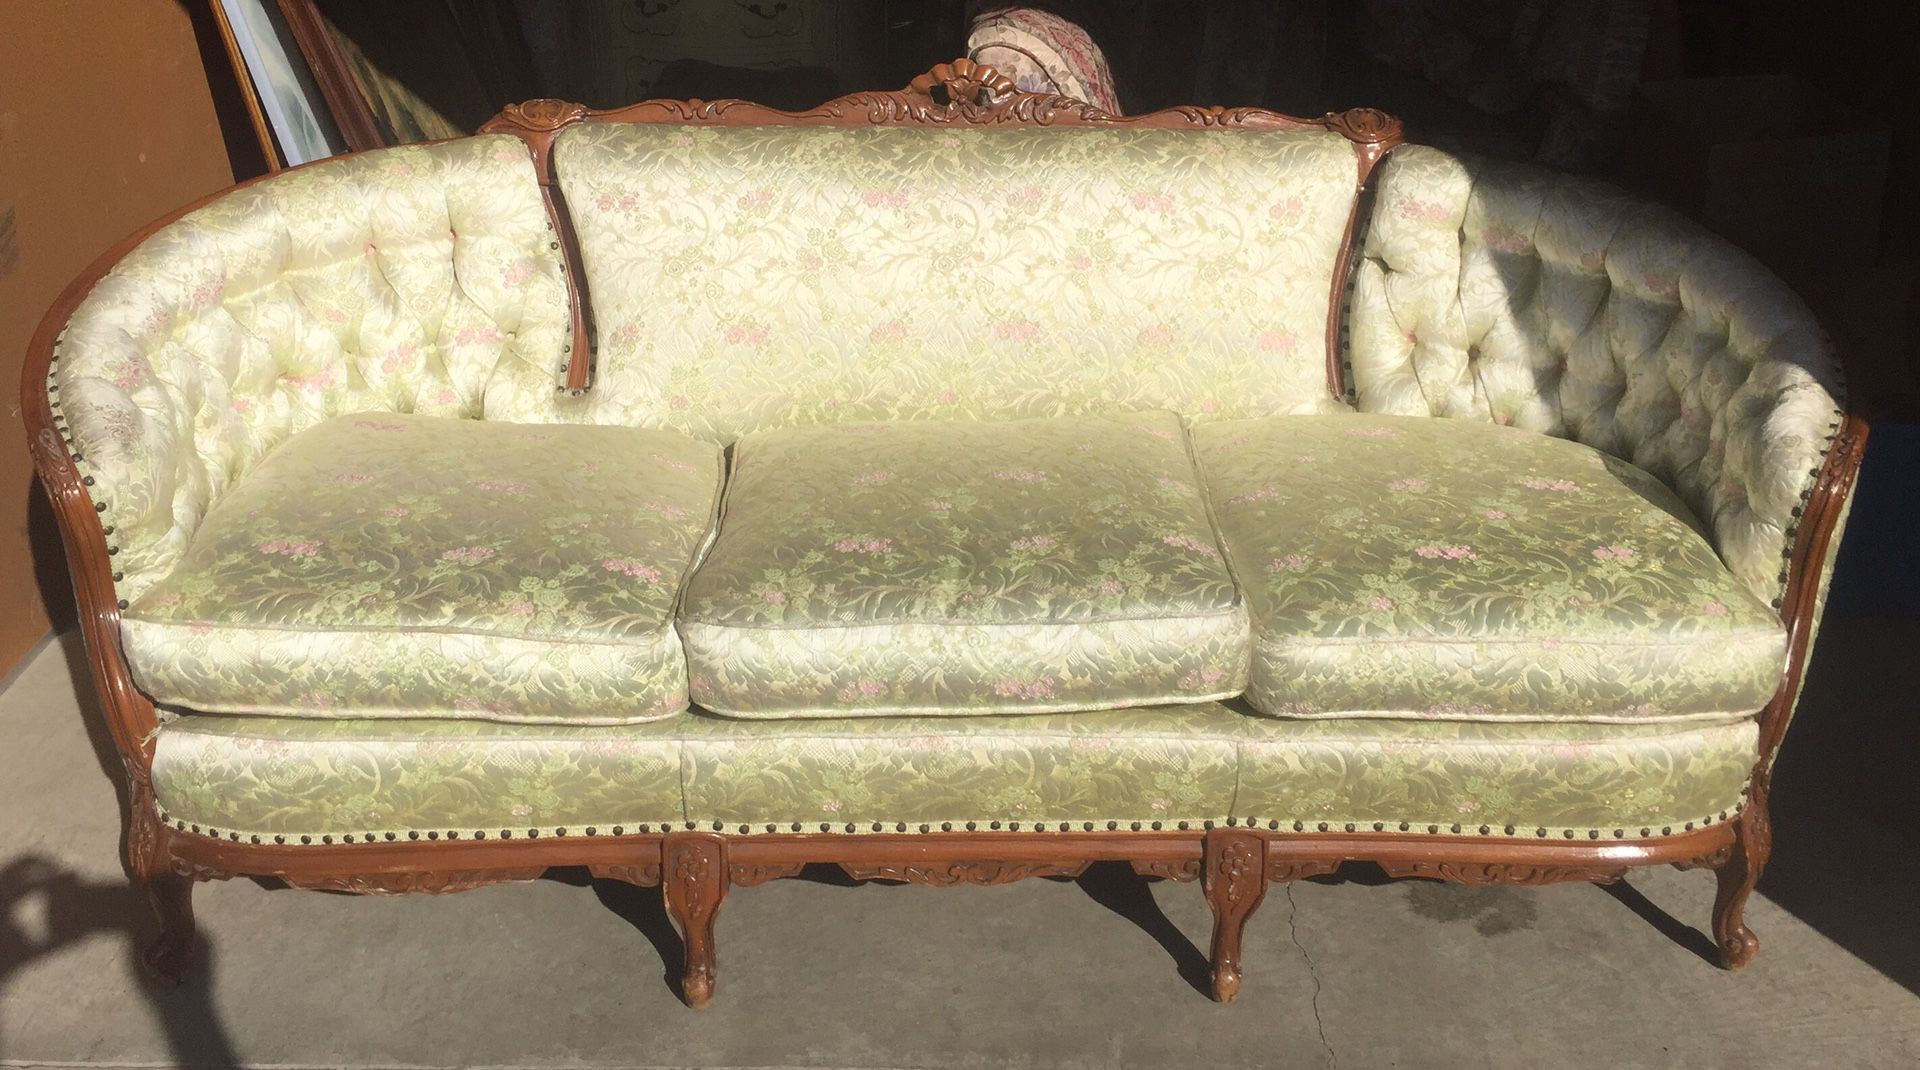 French provincial antique couch and chair